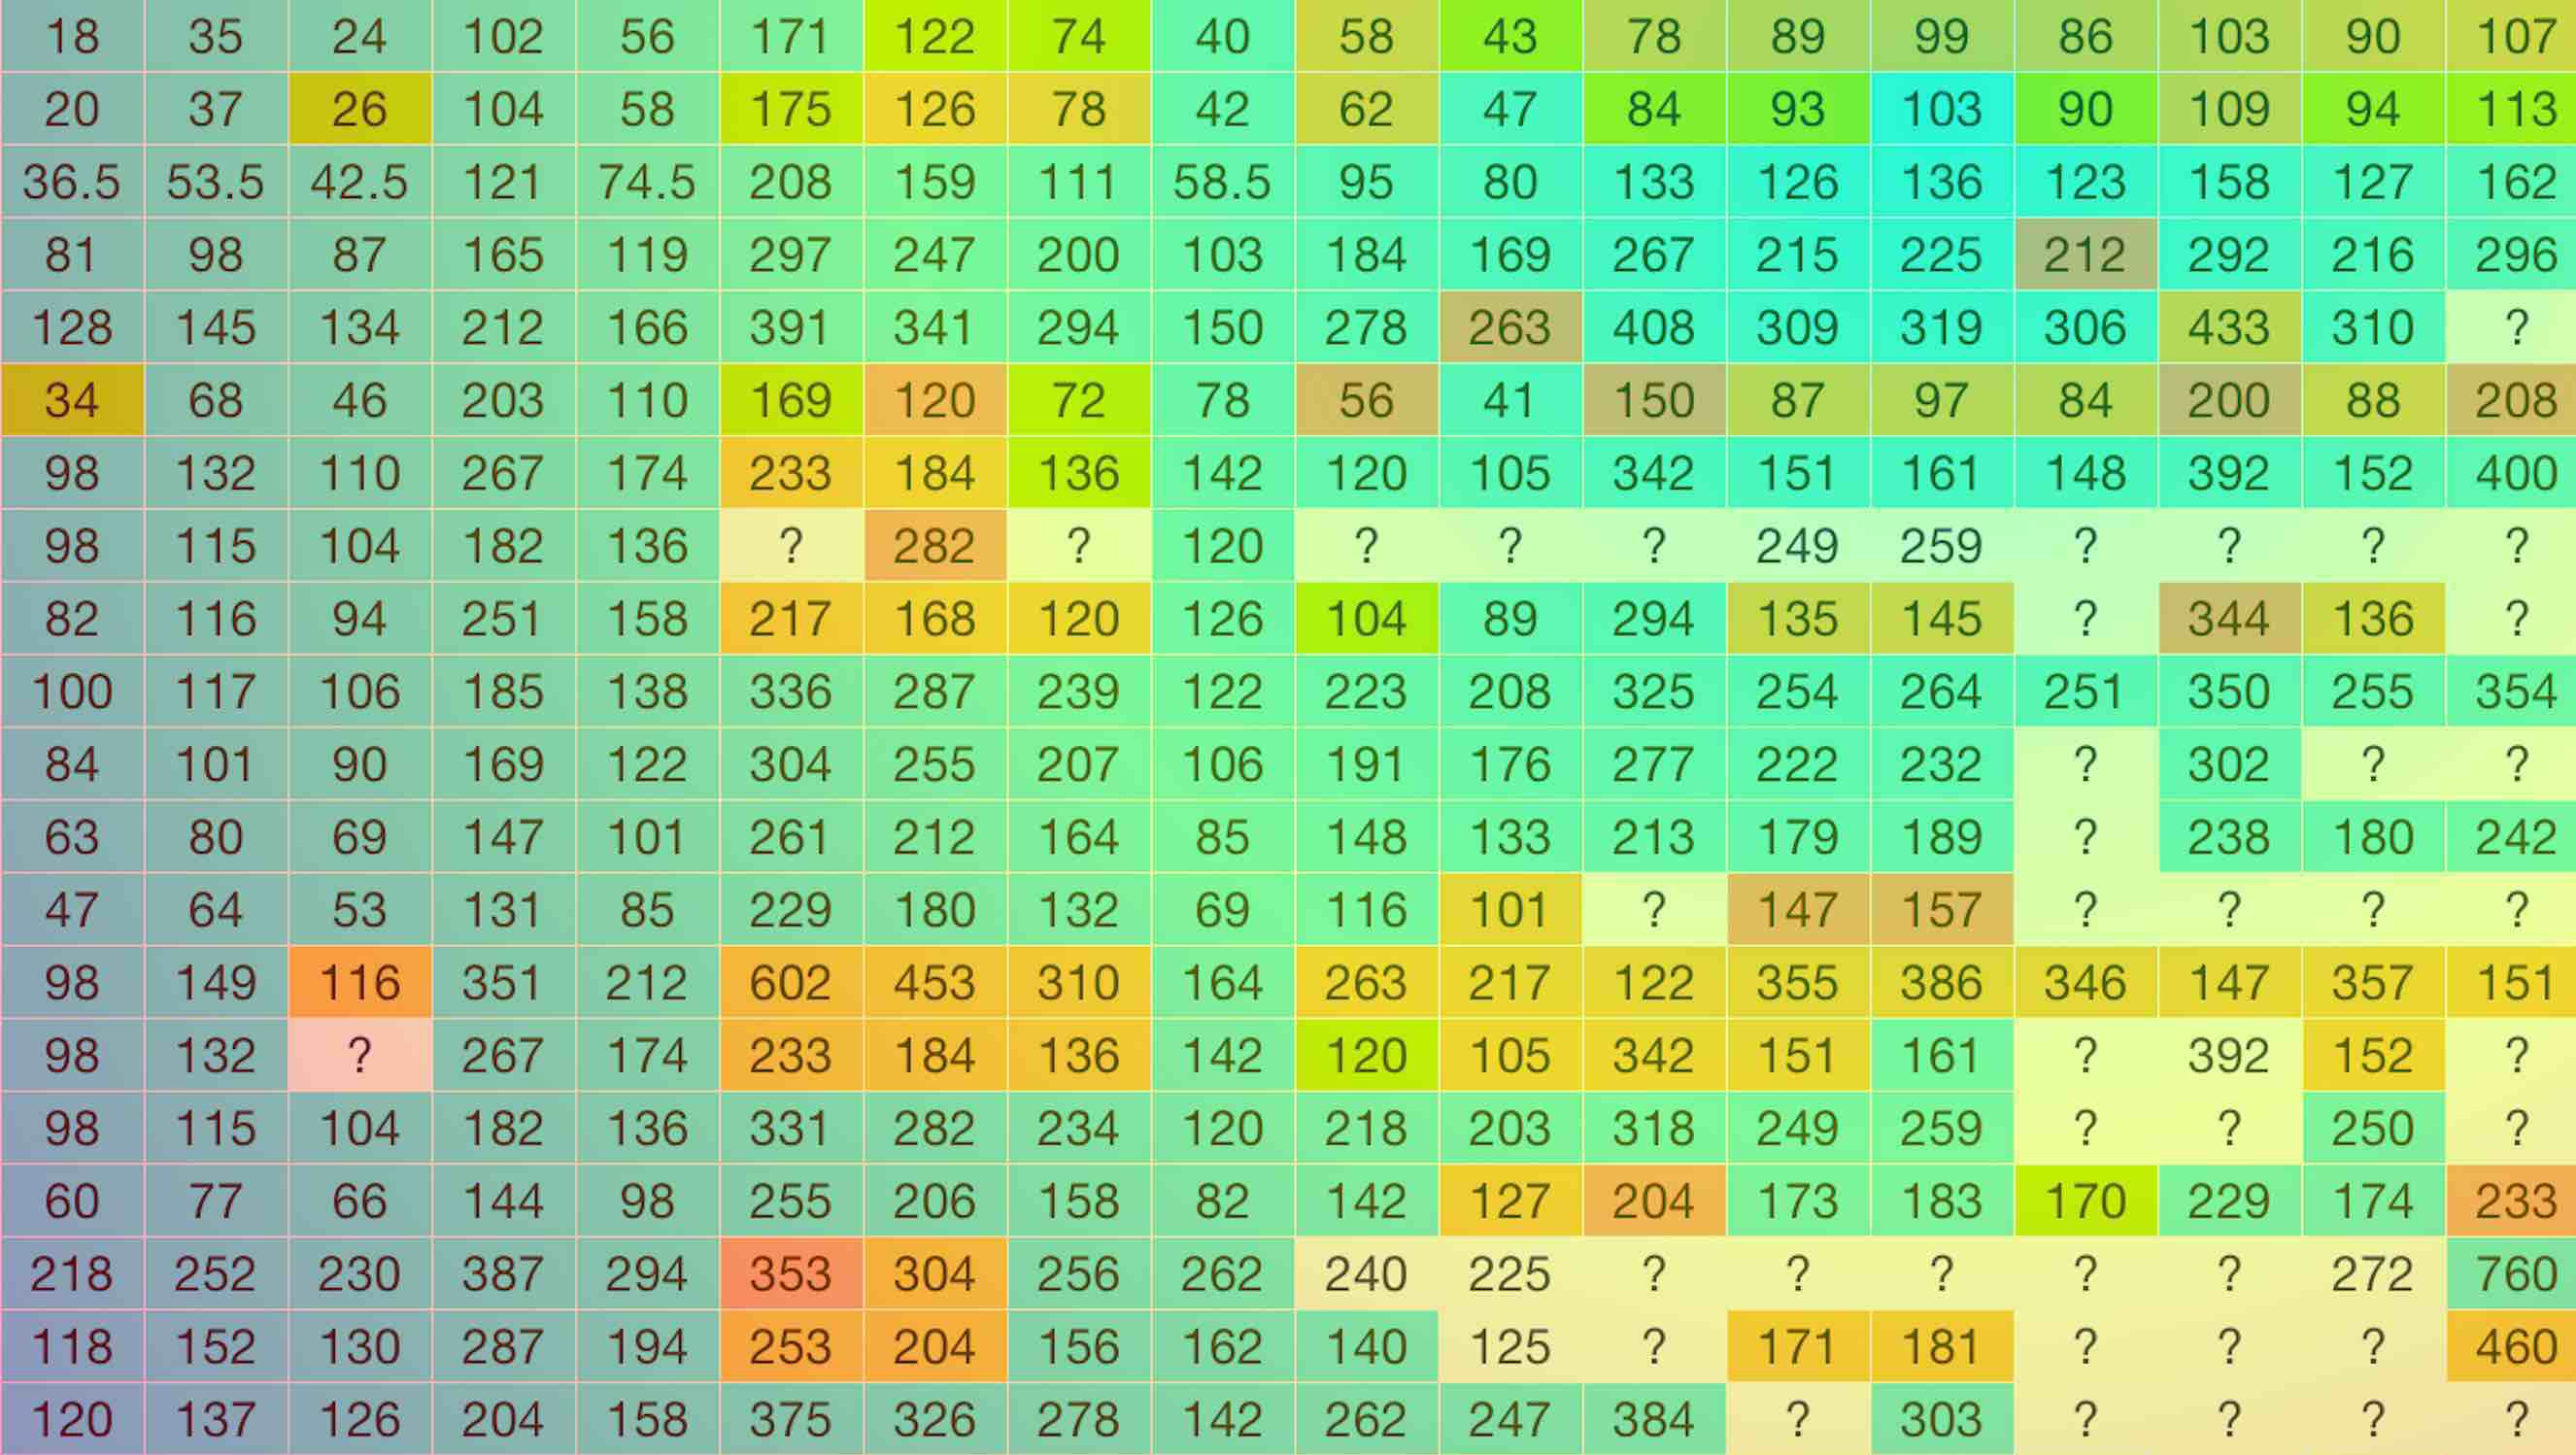 blurred solubility table background